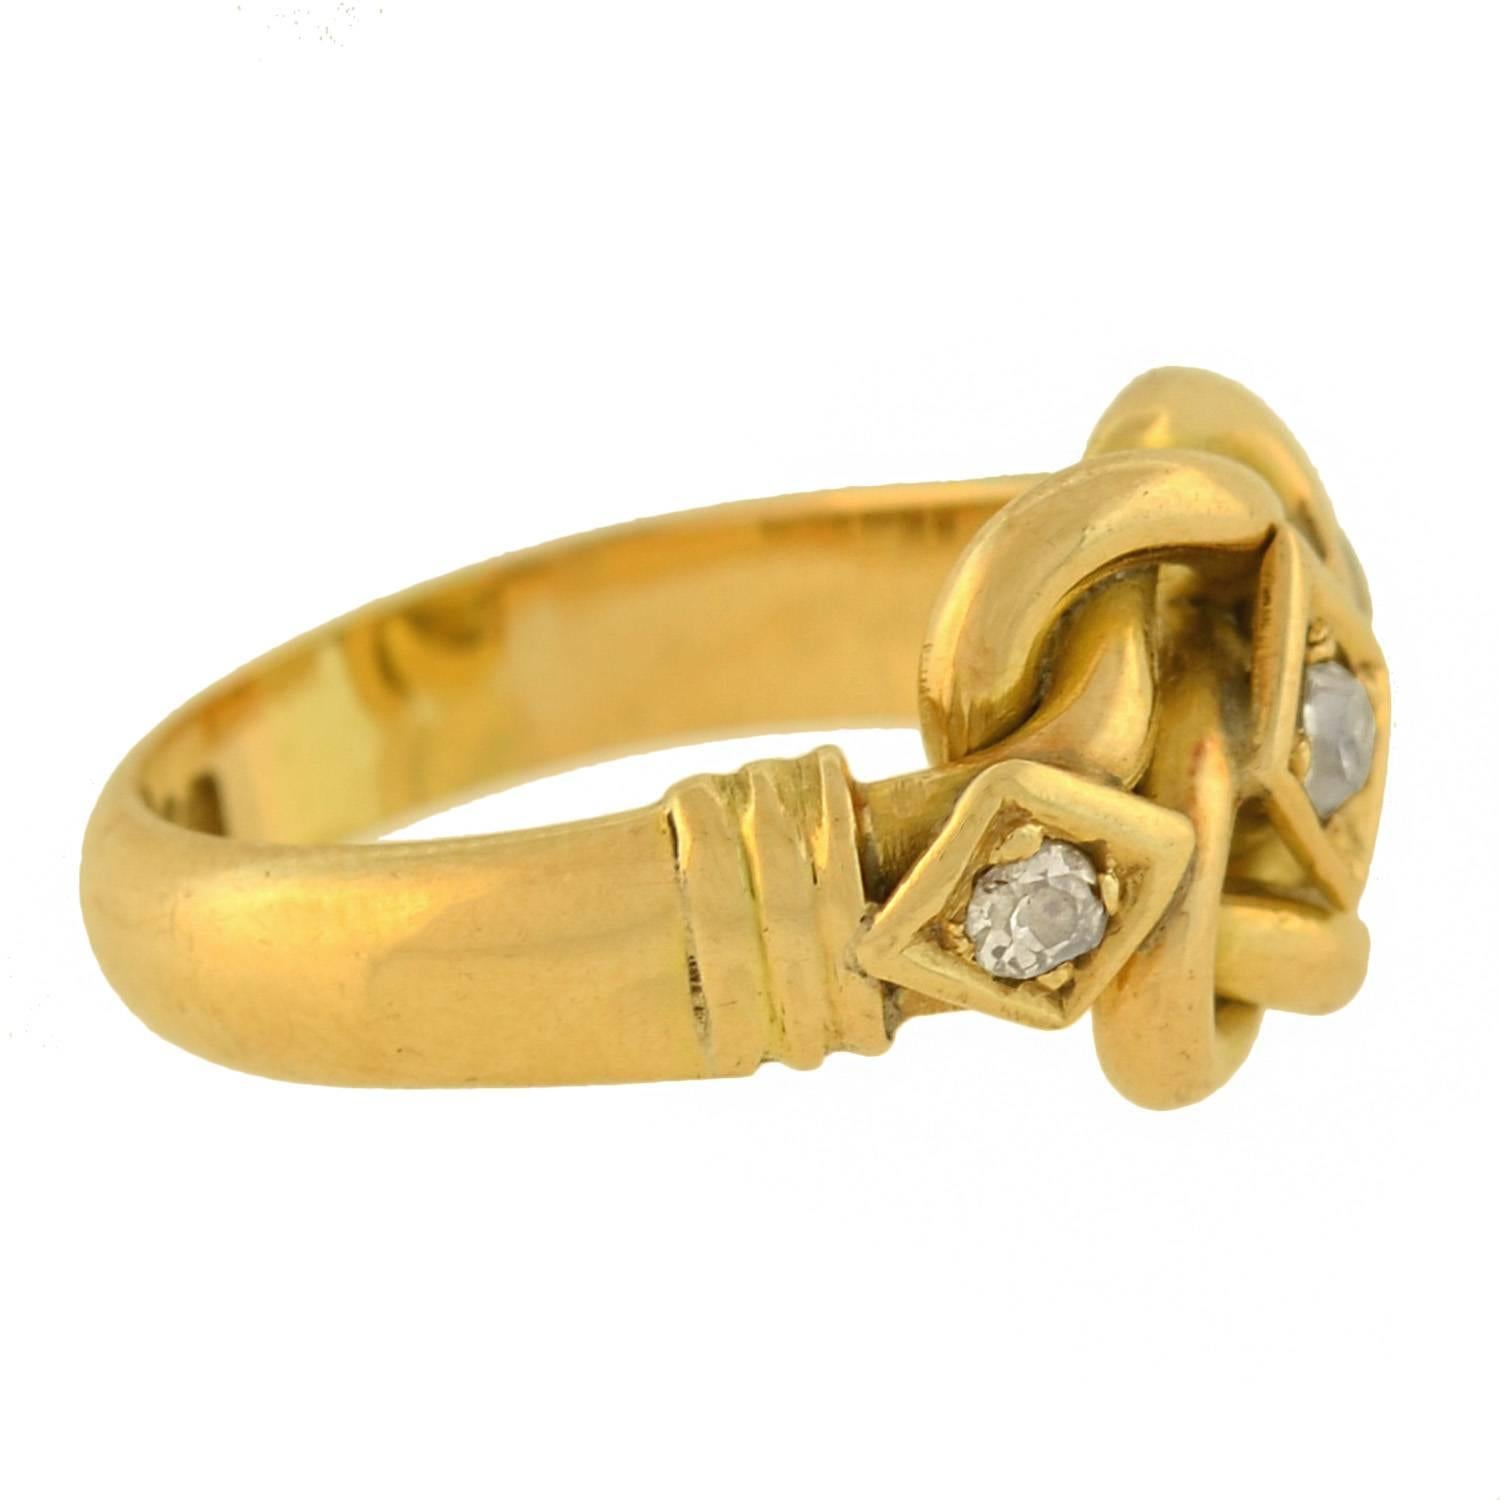 An absolutely stunning ring from the Edwardian (ca1911) era! This gorgeous piece is made of 18kt yellow gold and comprised of two gold tubes that twist and intertwine, forming the shape of an attractive love knot. Set within the center of the knot